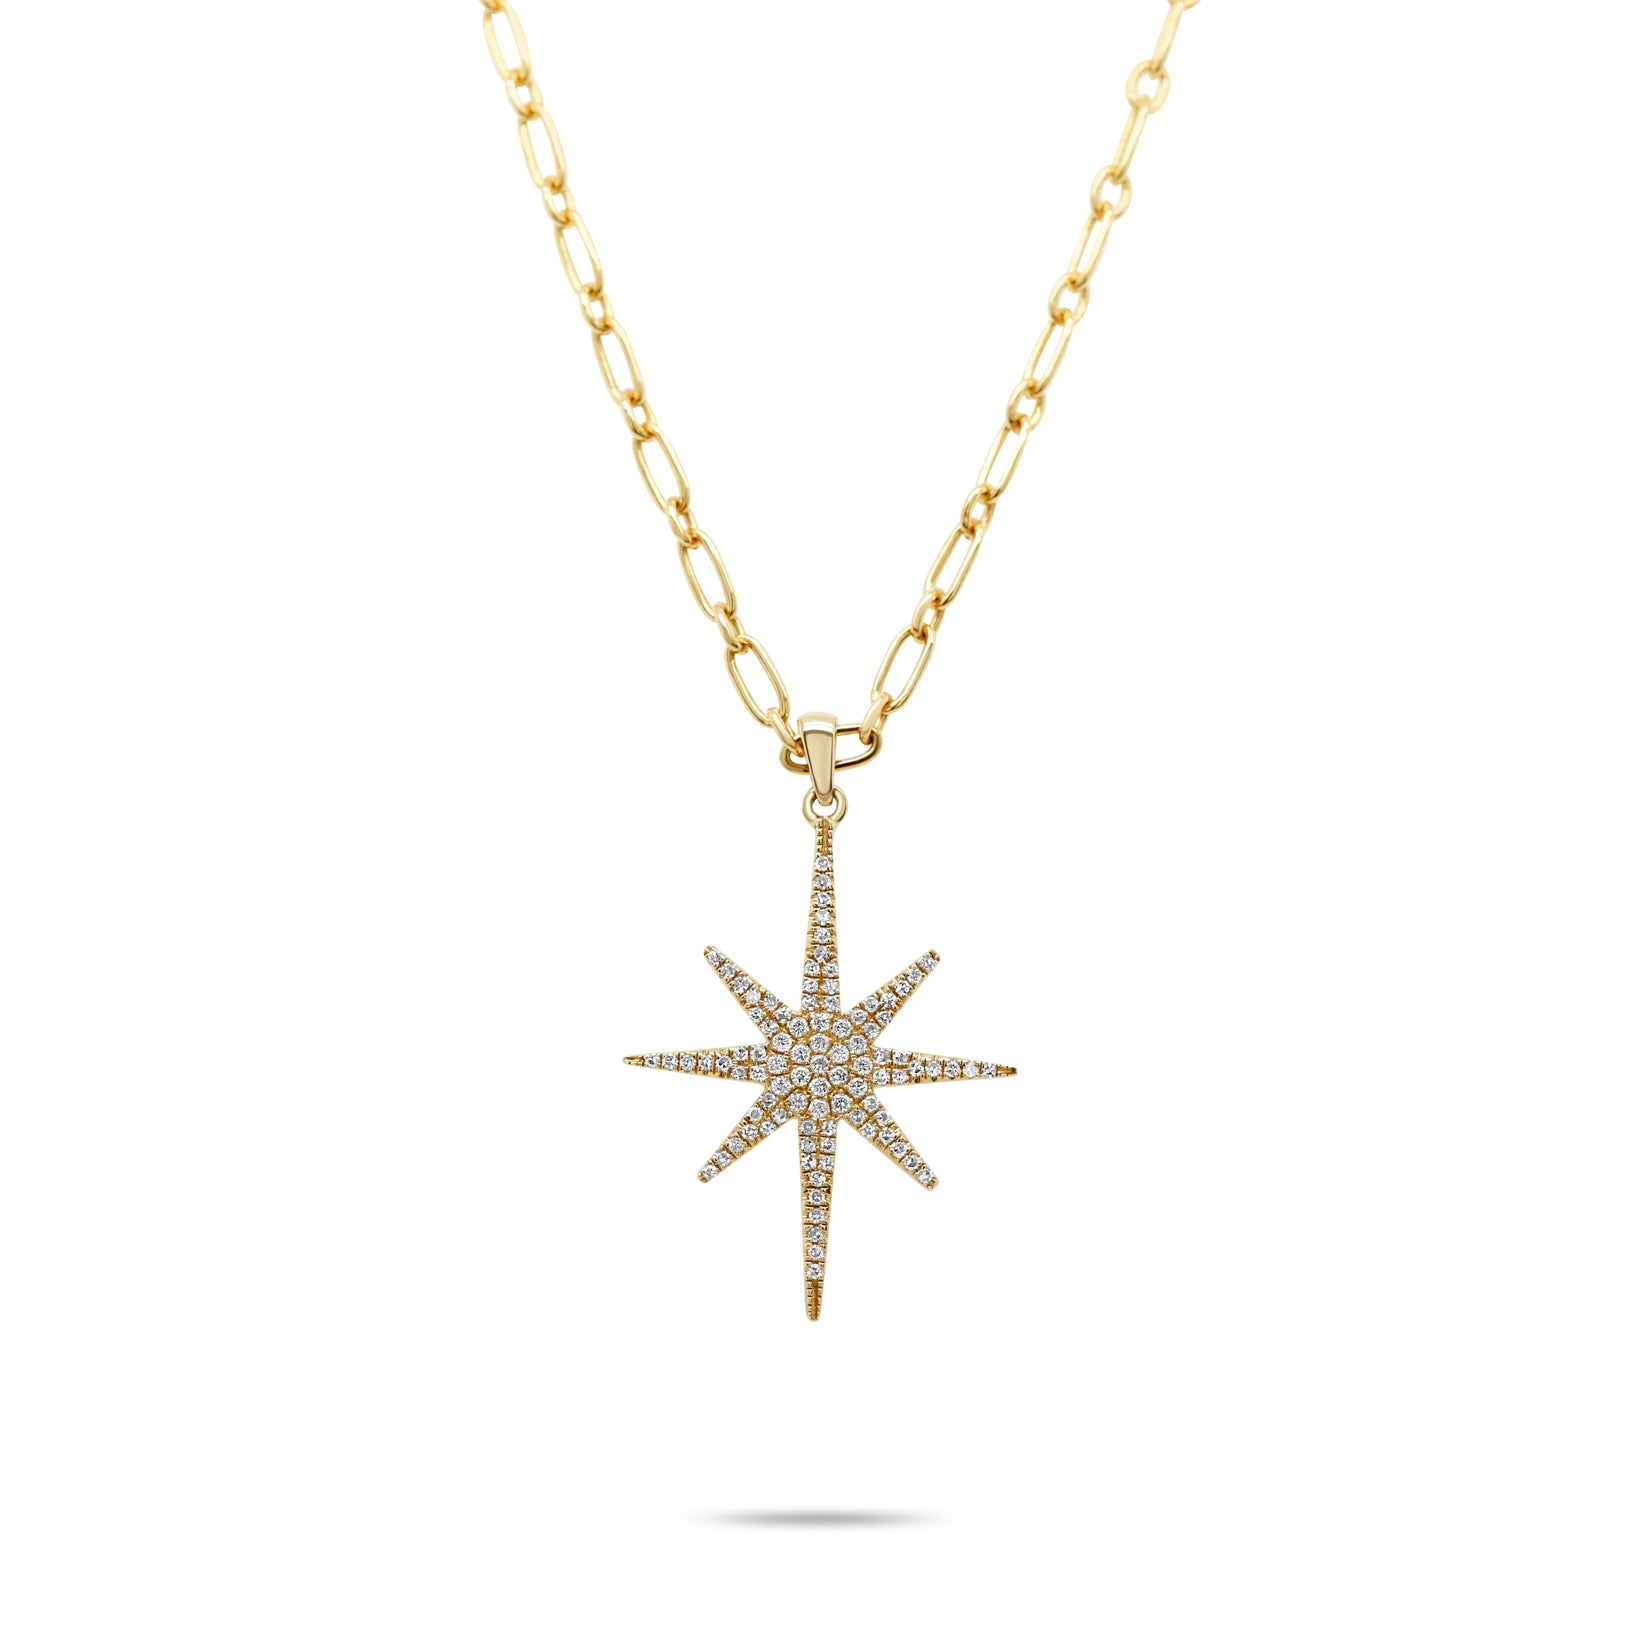 14k yellow gold diamond pave elongated star pendant necklace on anchor chain 